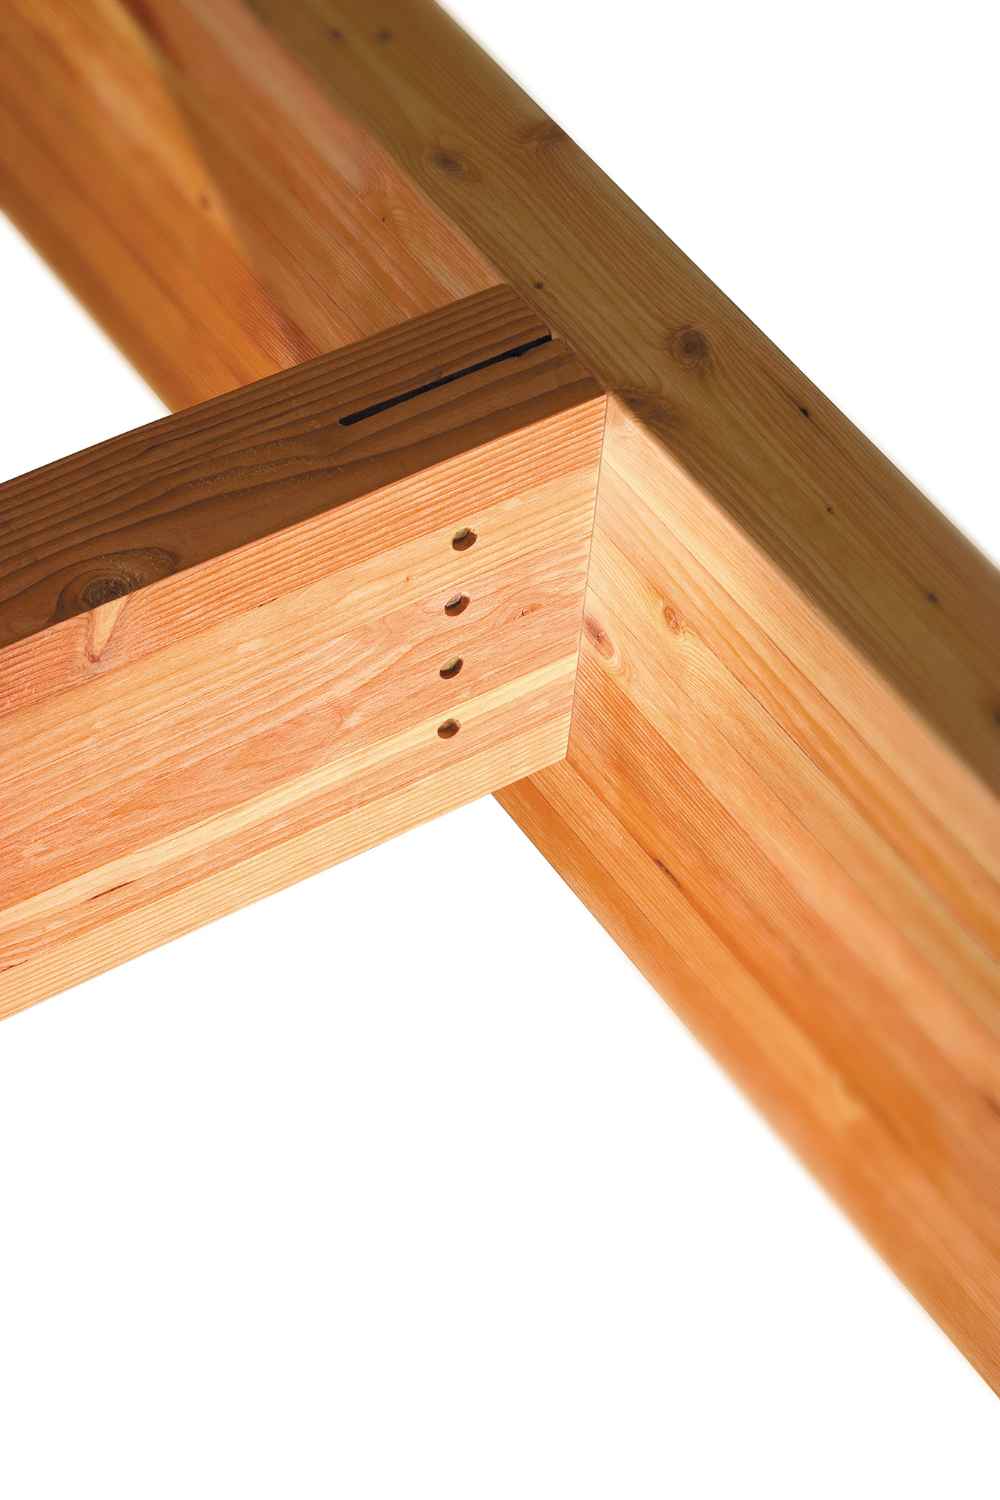 Simpson CJT6ZL Concealed Joist Tie w Long Pins ZMAX Finish image 4 of 5